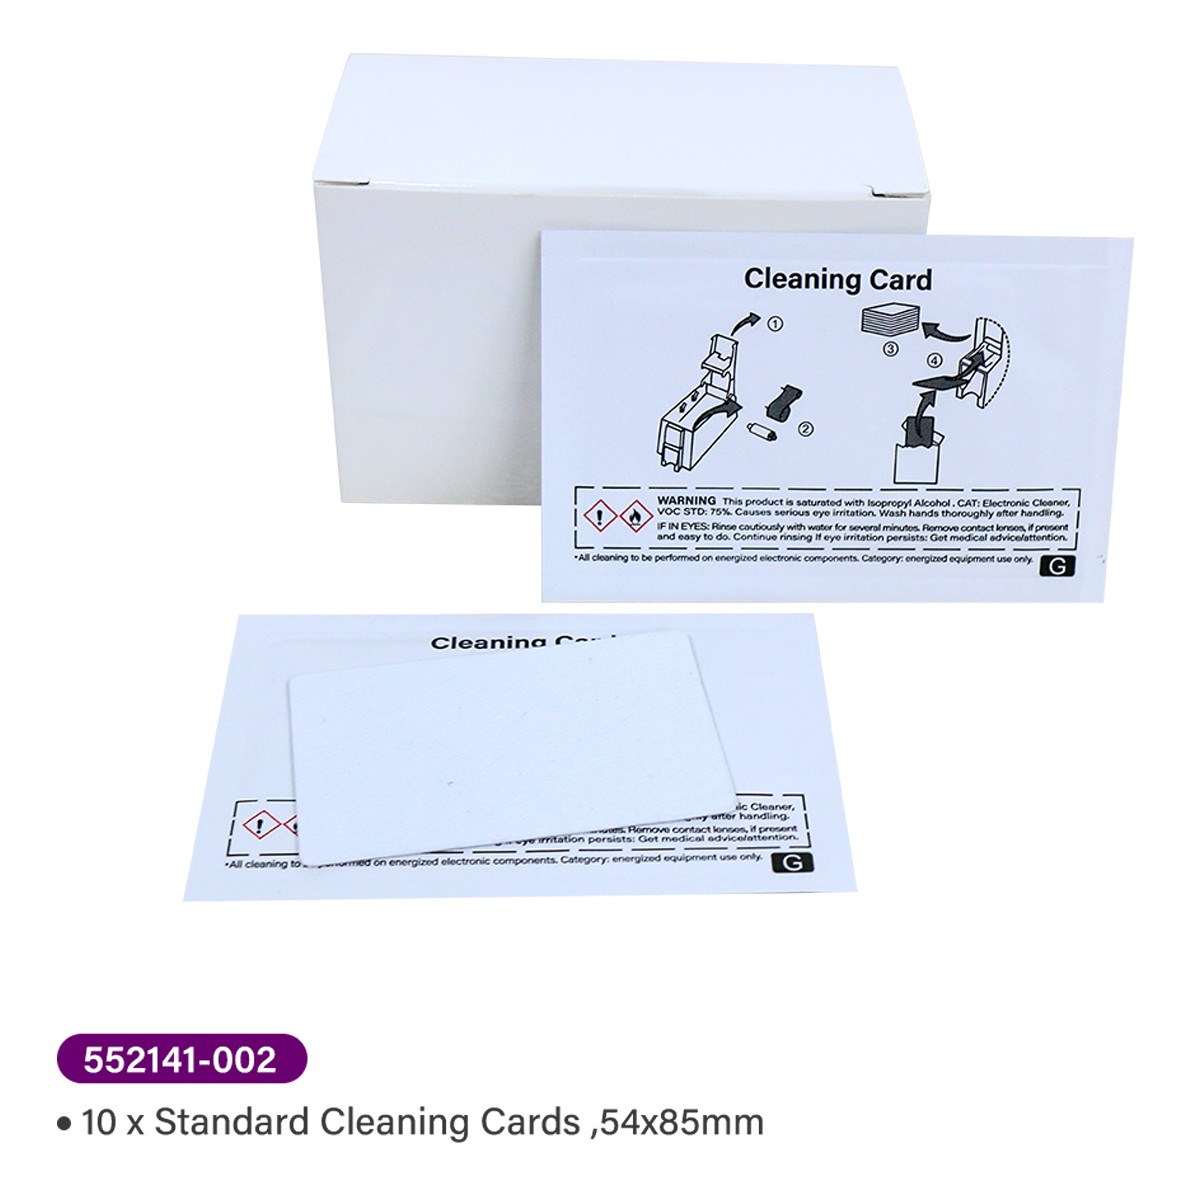 New compatible Clean card for Datacard 552141-002 10 pcs CR80 54